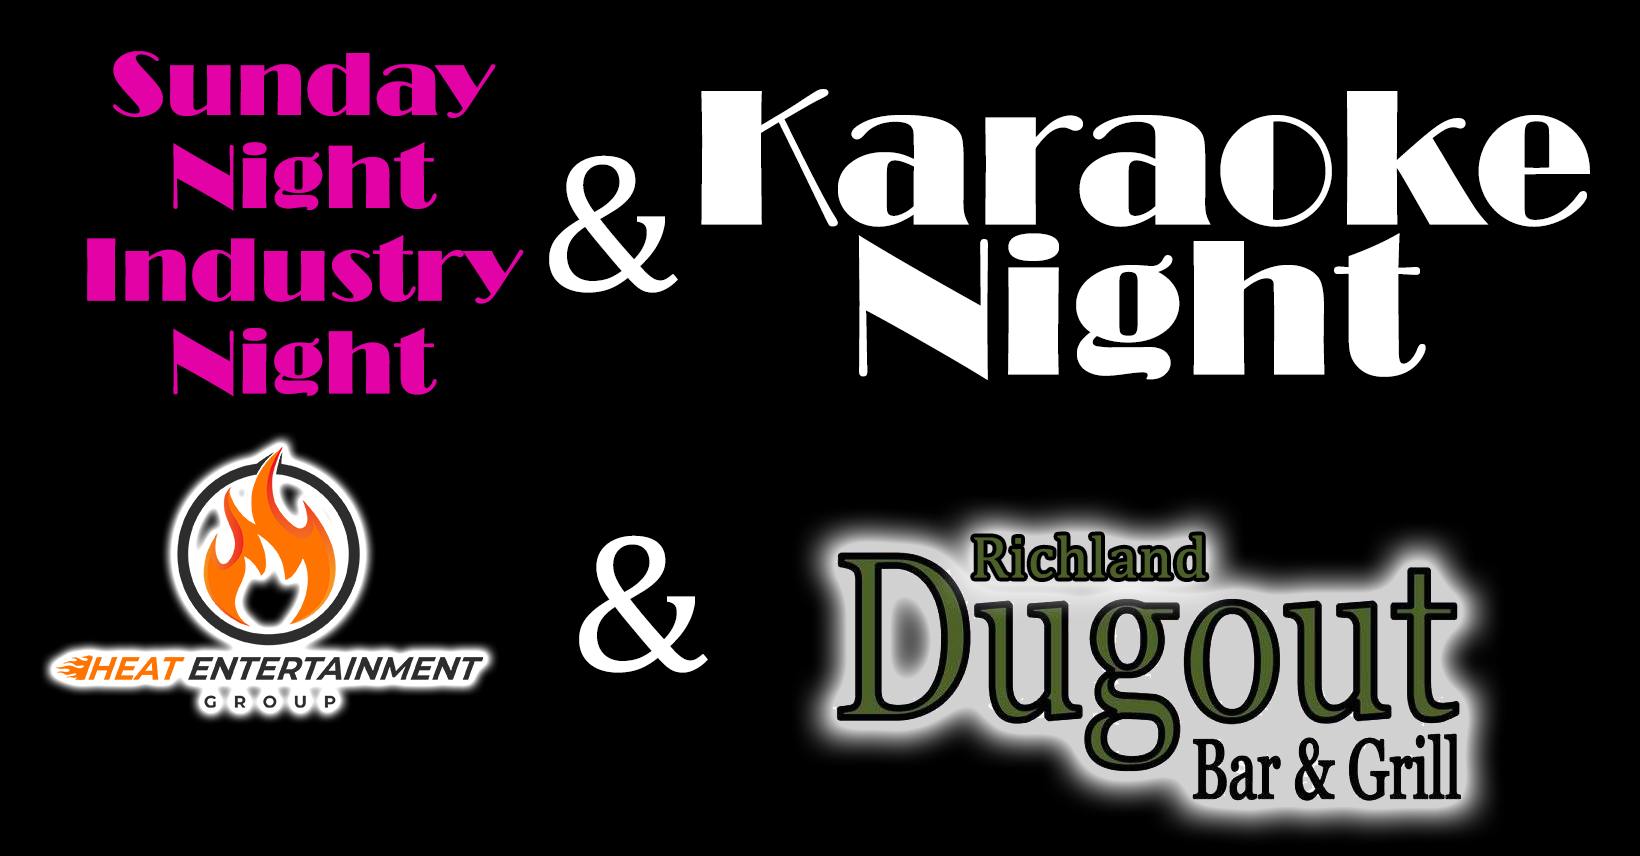 Sunday Night Karaoke and Industry Night at Richland Dugout with Craig Heat